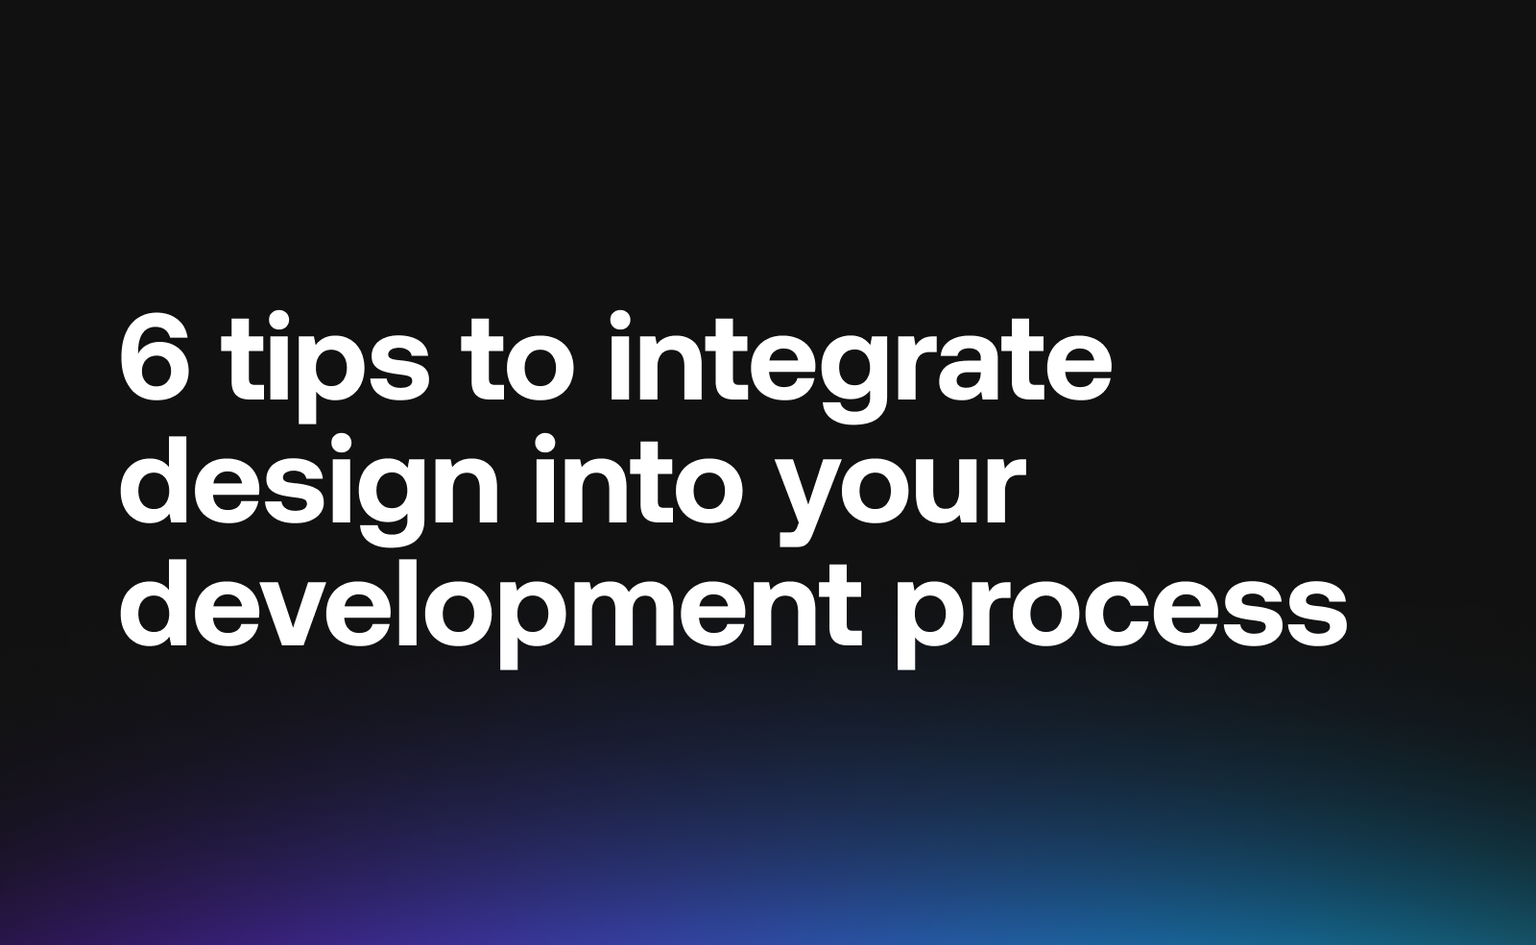 6 tips to integrate design into your development process